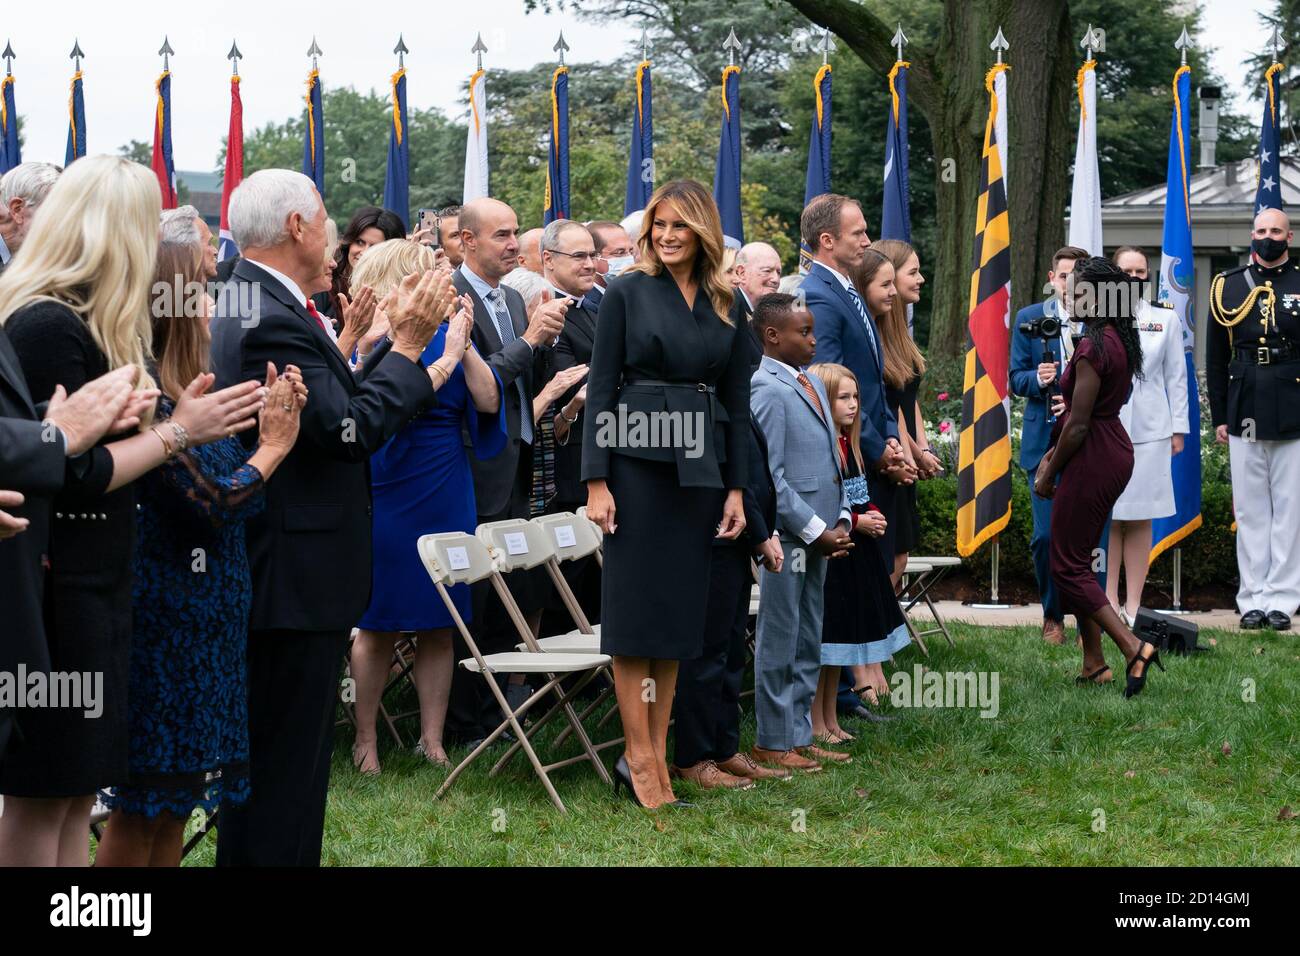 President Trump Nominates Judge Amy Coney Barrett for Associate Justice of the U.S. Supreme Court. First Lady Melania Trump receives applause as she arrives to attend President Donald J. Trump’s announcement of Judge Amy Coney Barrett as his nominee for Associate Justice of the Supreme Court of the United States Saturday, Sept. 26, 2020, in the Rose Garden of the White House. Stock Photo